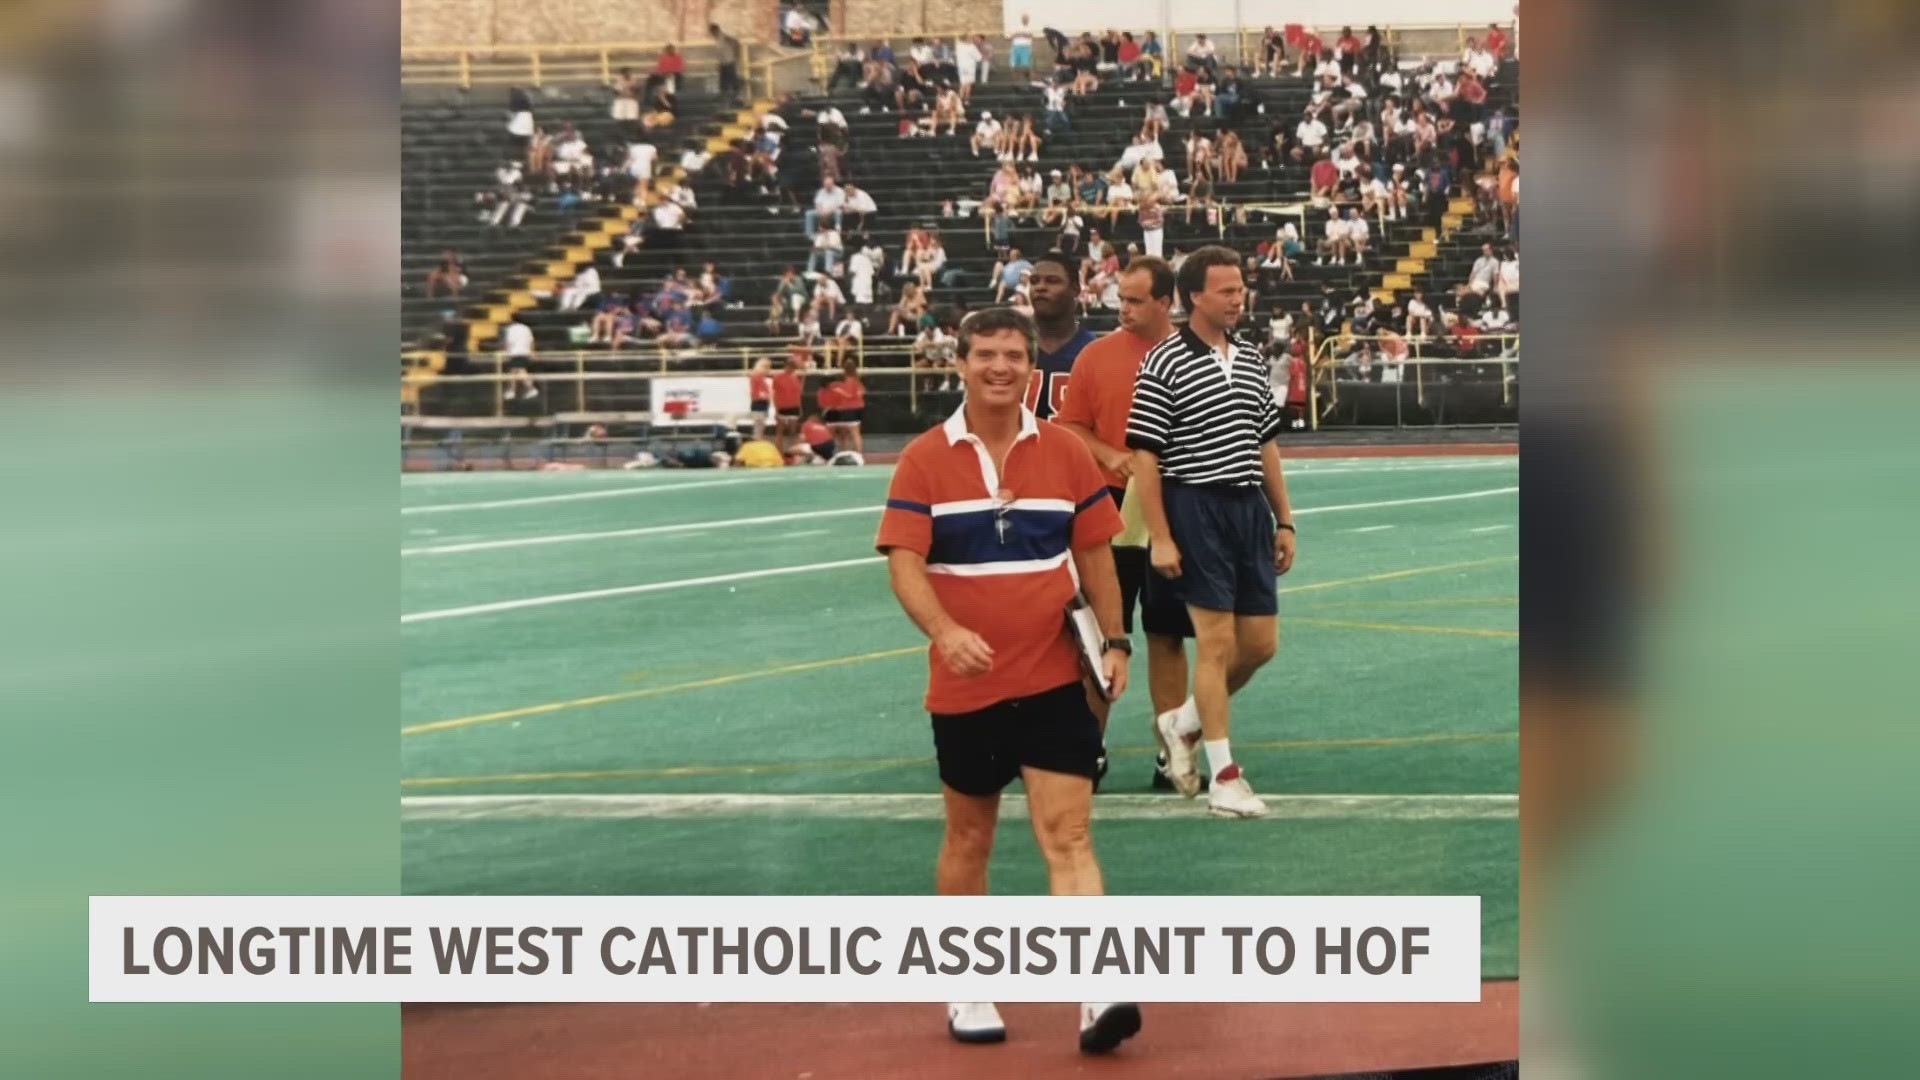 Jim Schaak joined the West Catholic High School football staff in the fall of 1967.